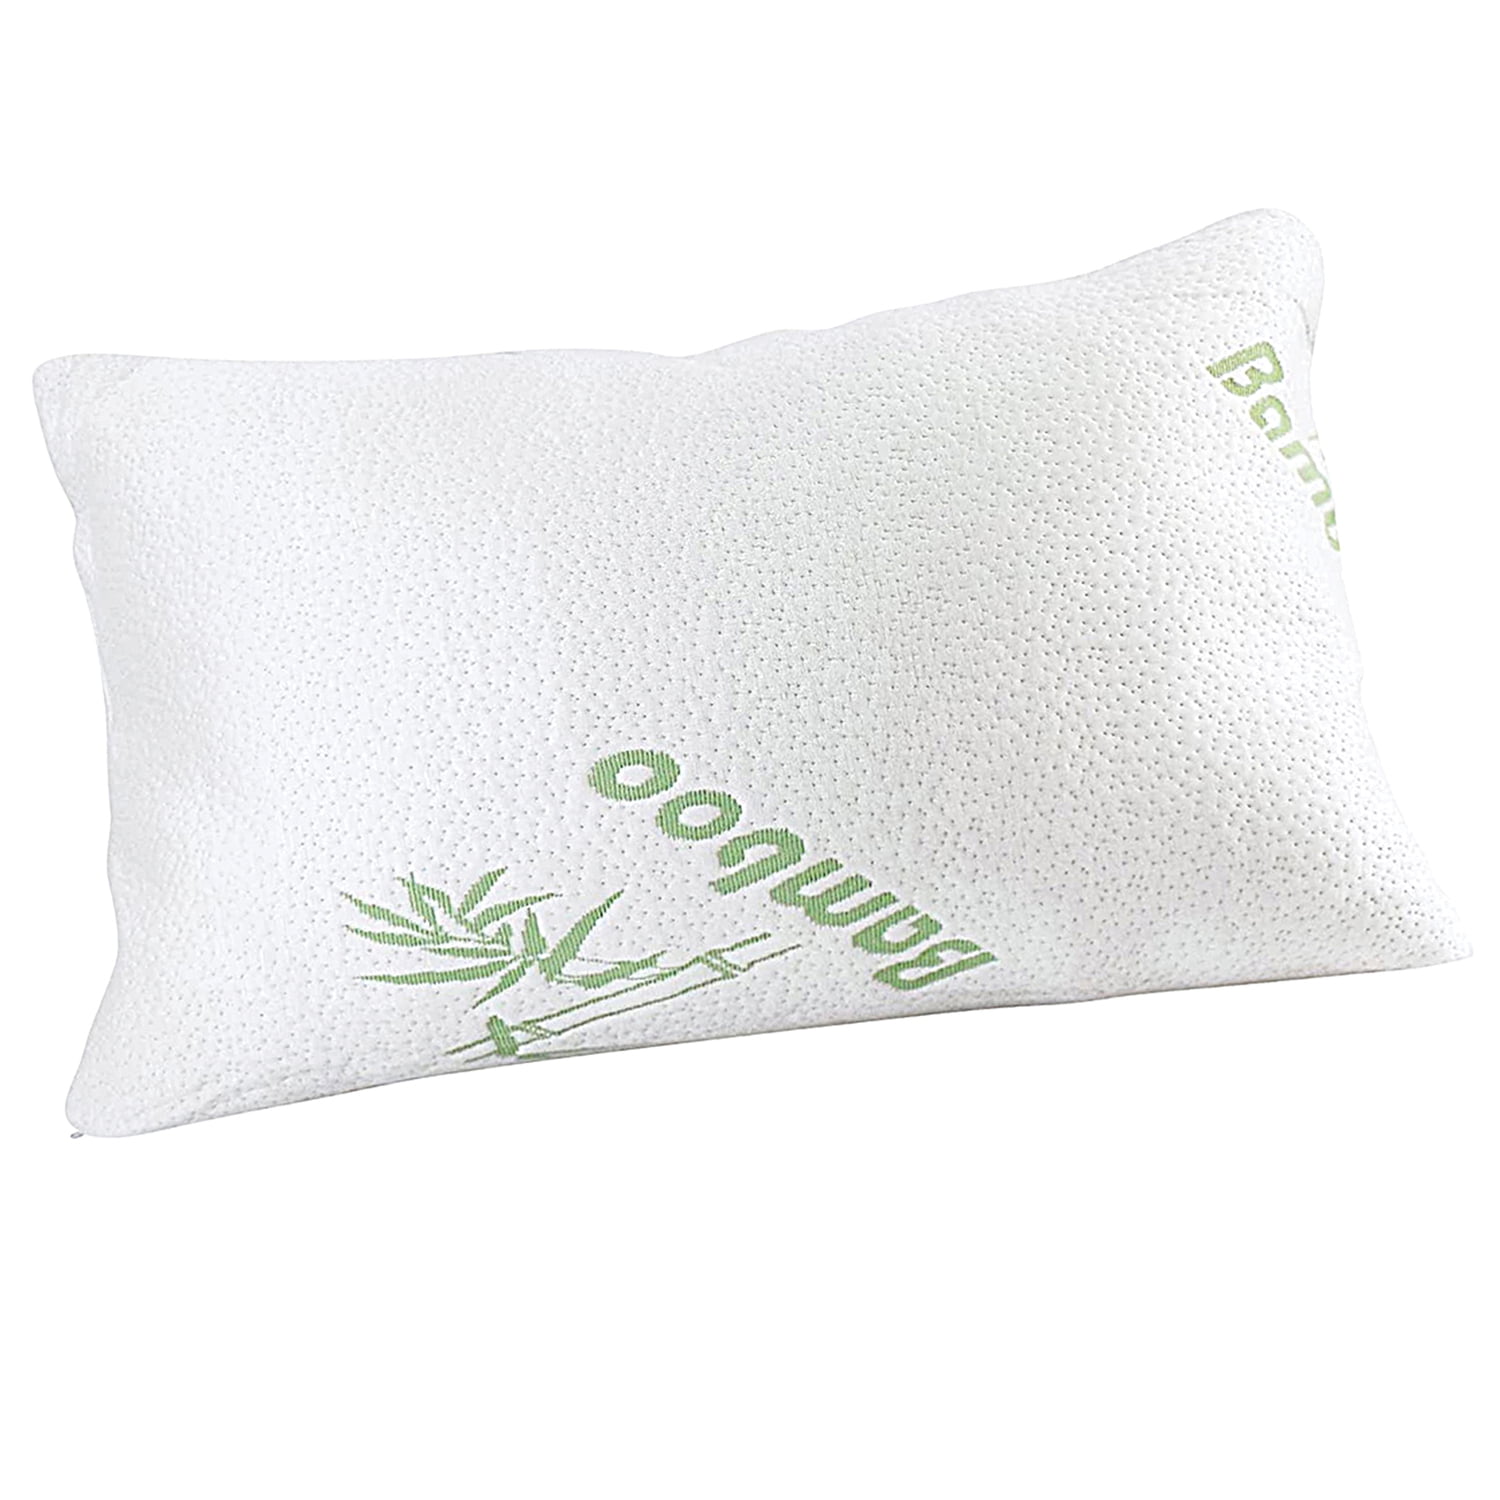 COZIEST SHREDDED BAMBOO MEMORY FOAM PILLOW HELPS BREATHING AND REDUCES SNORING 